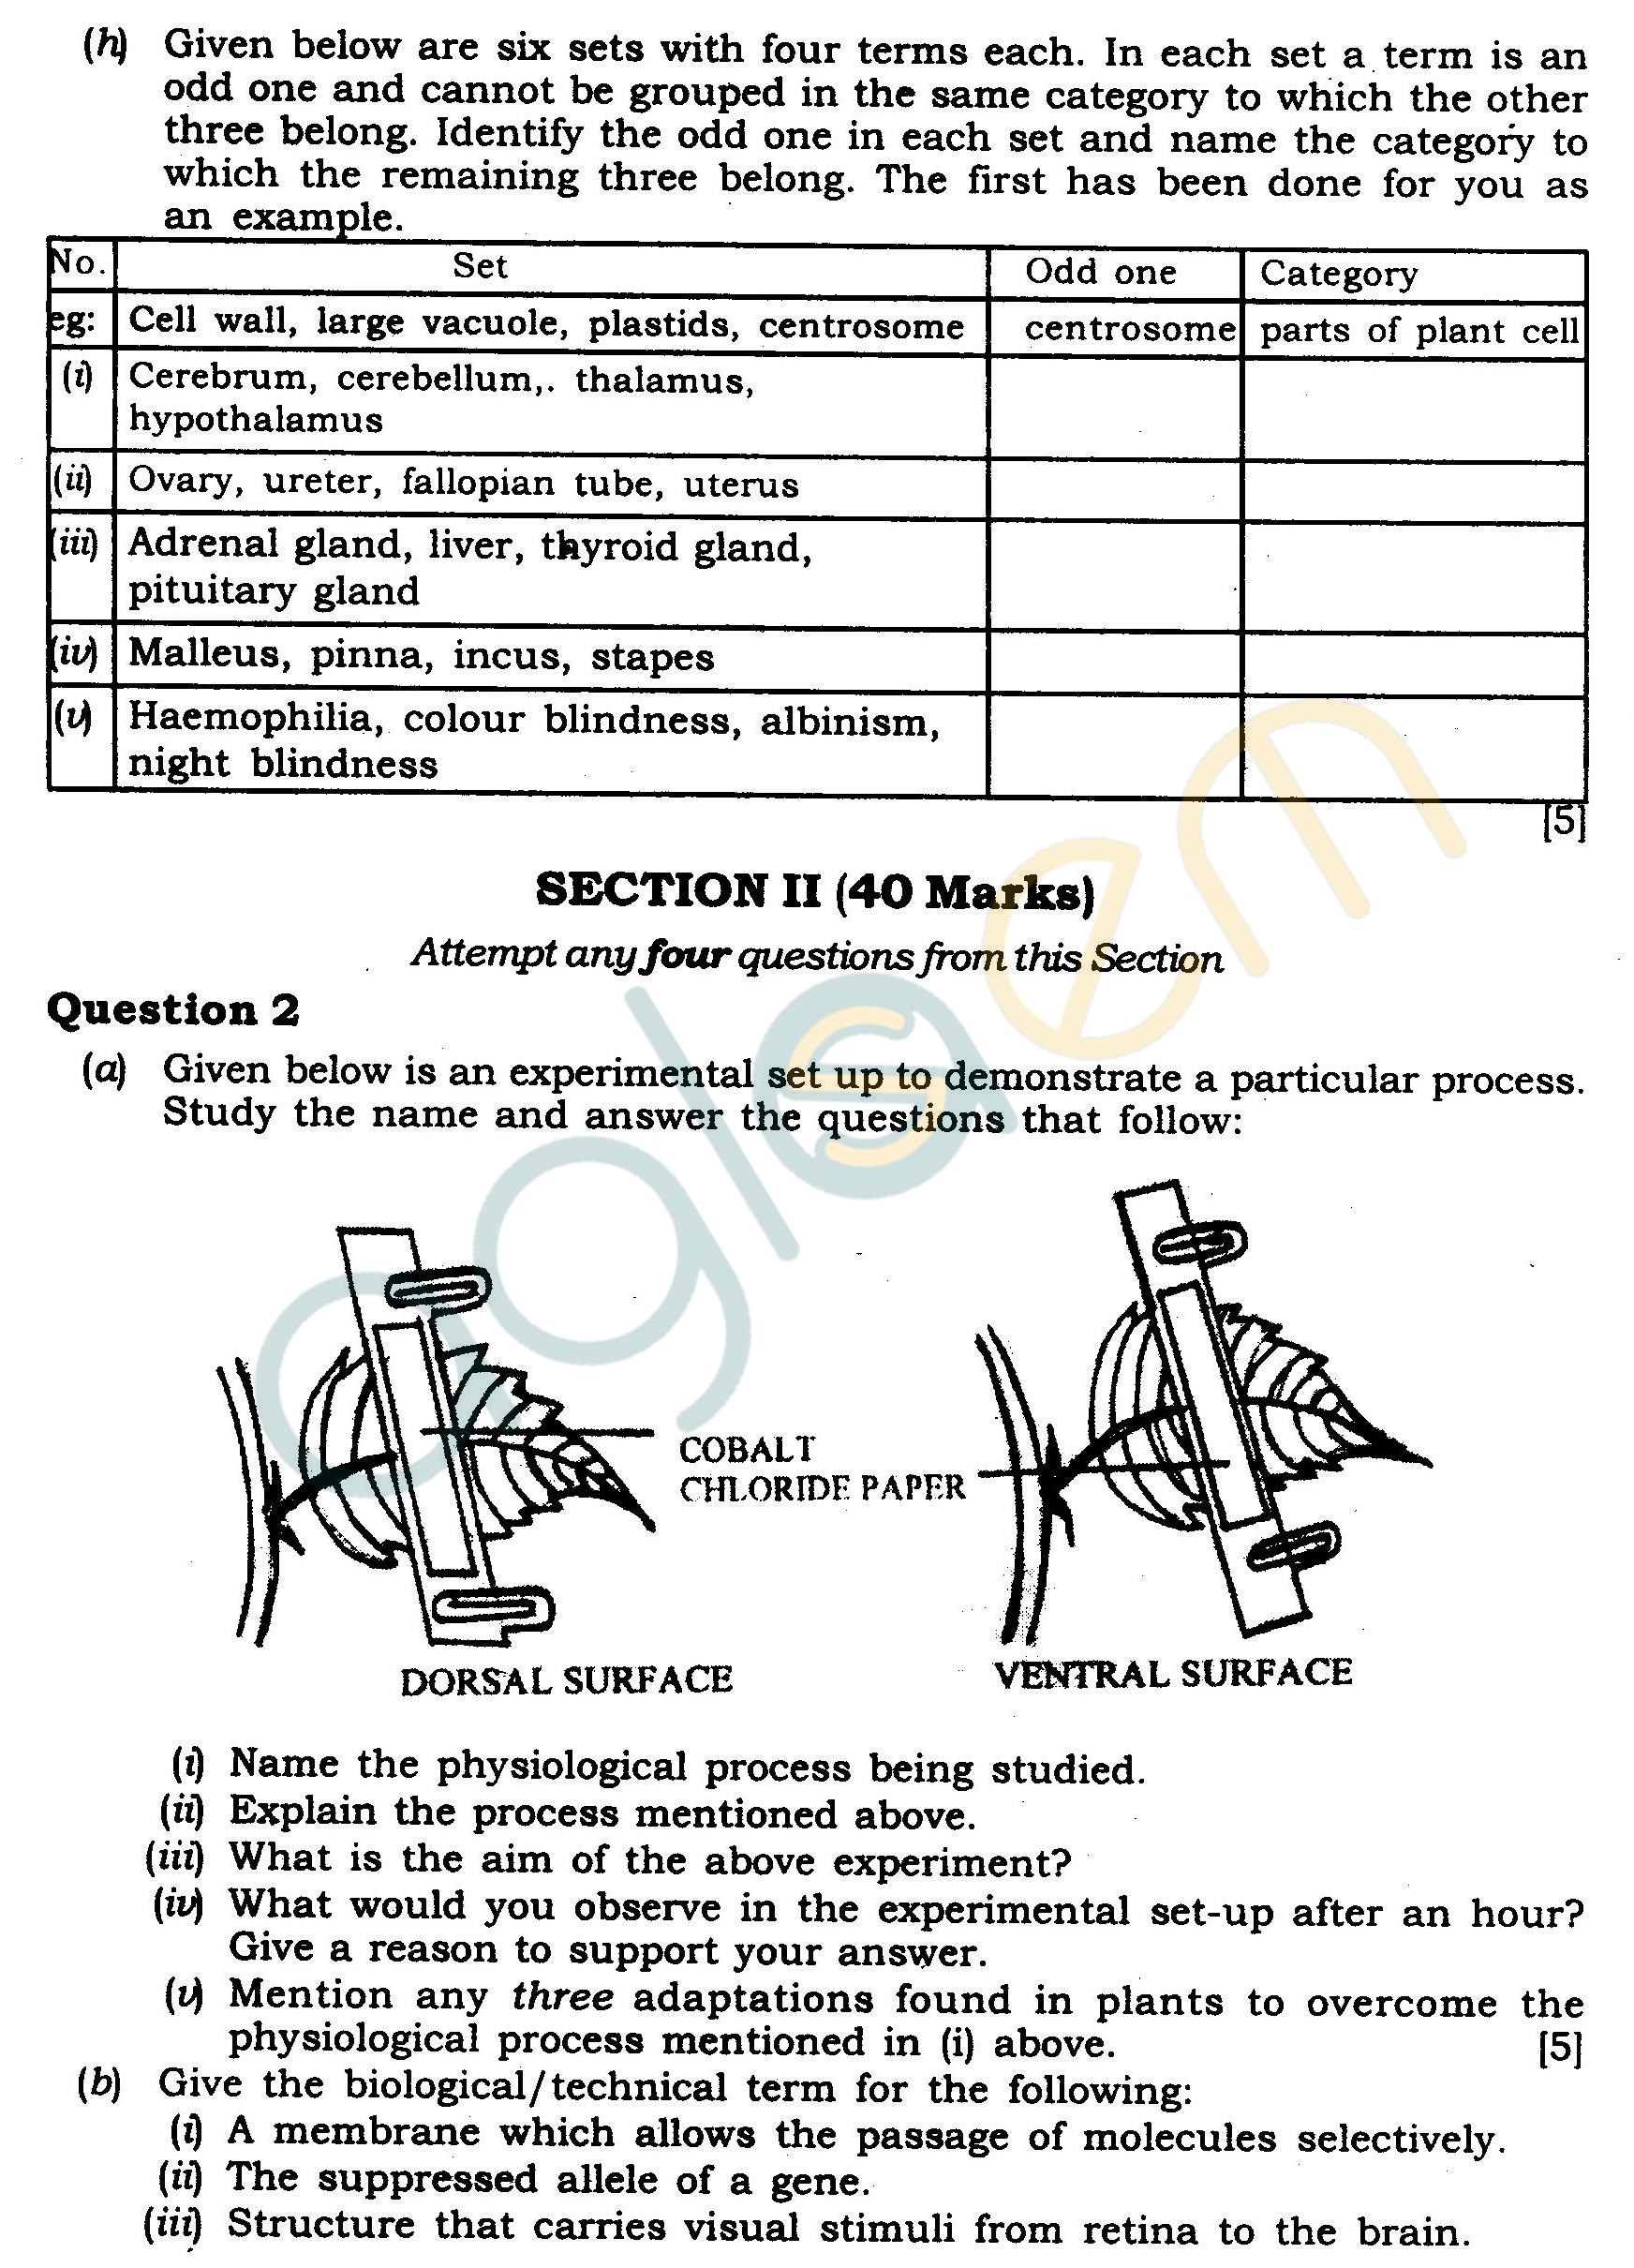 ICSE Class X Exam Question Papers 2012 Biology (Science Paper-3)